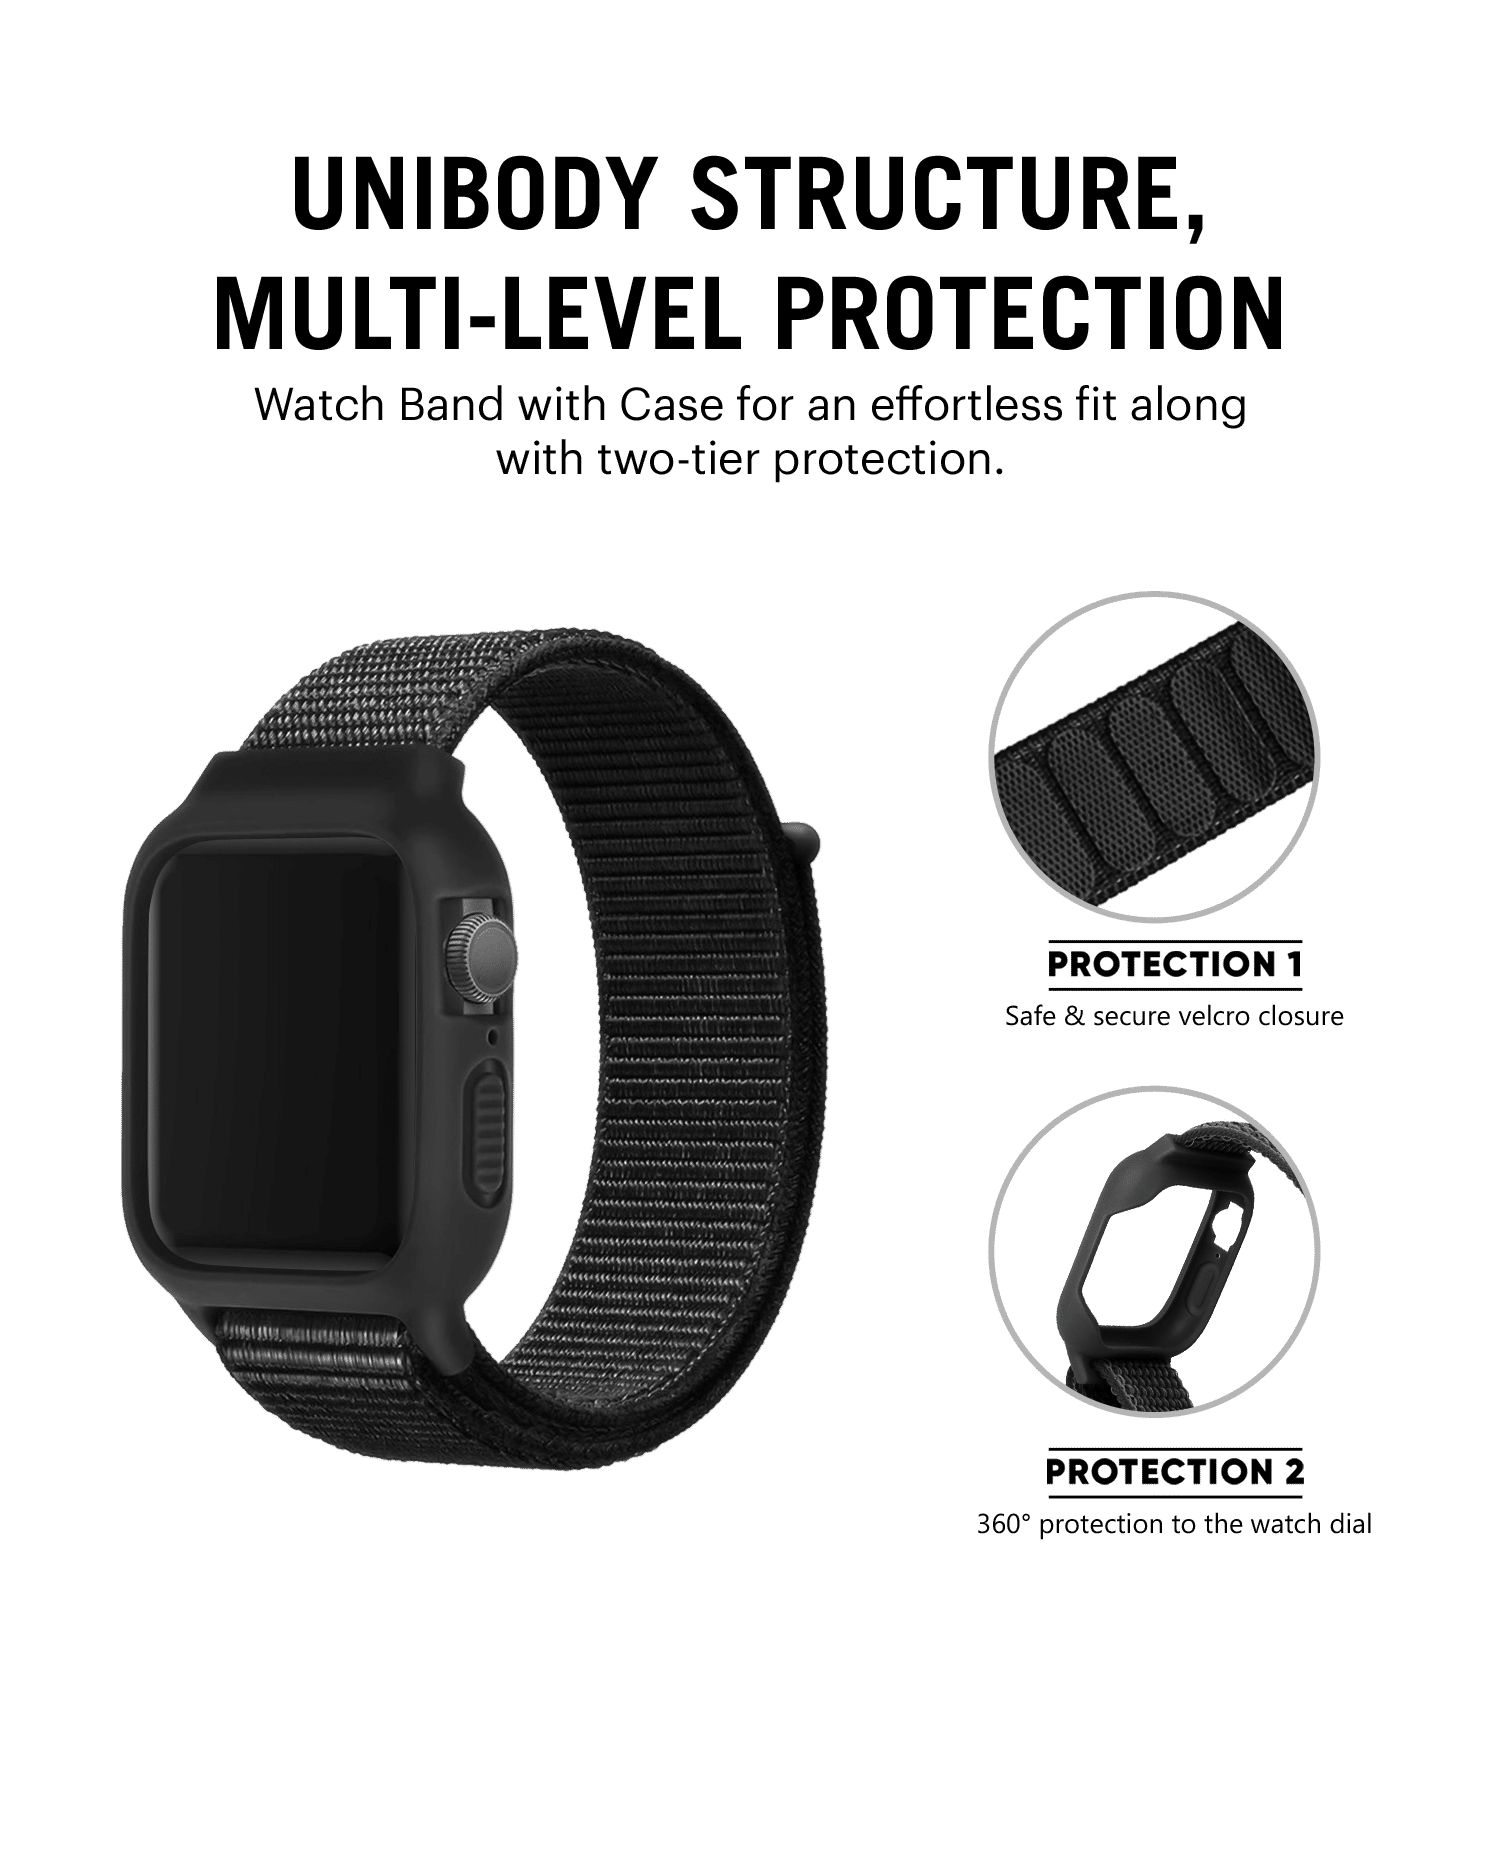 Buy Universal Round Watch Screen Protector (2 Units) Bubble Free  Anti-Scratch Invisible Protection Good for Smart Watch Too by IPG Size  Options are Available (41 mm Diameter) Online at Lowest Price Ever